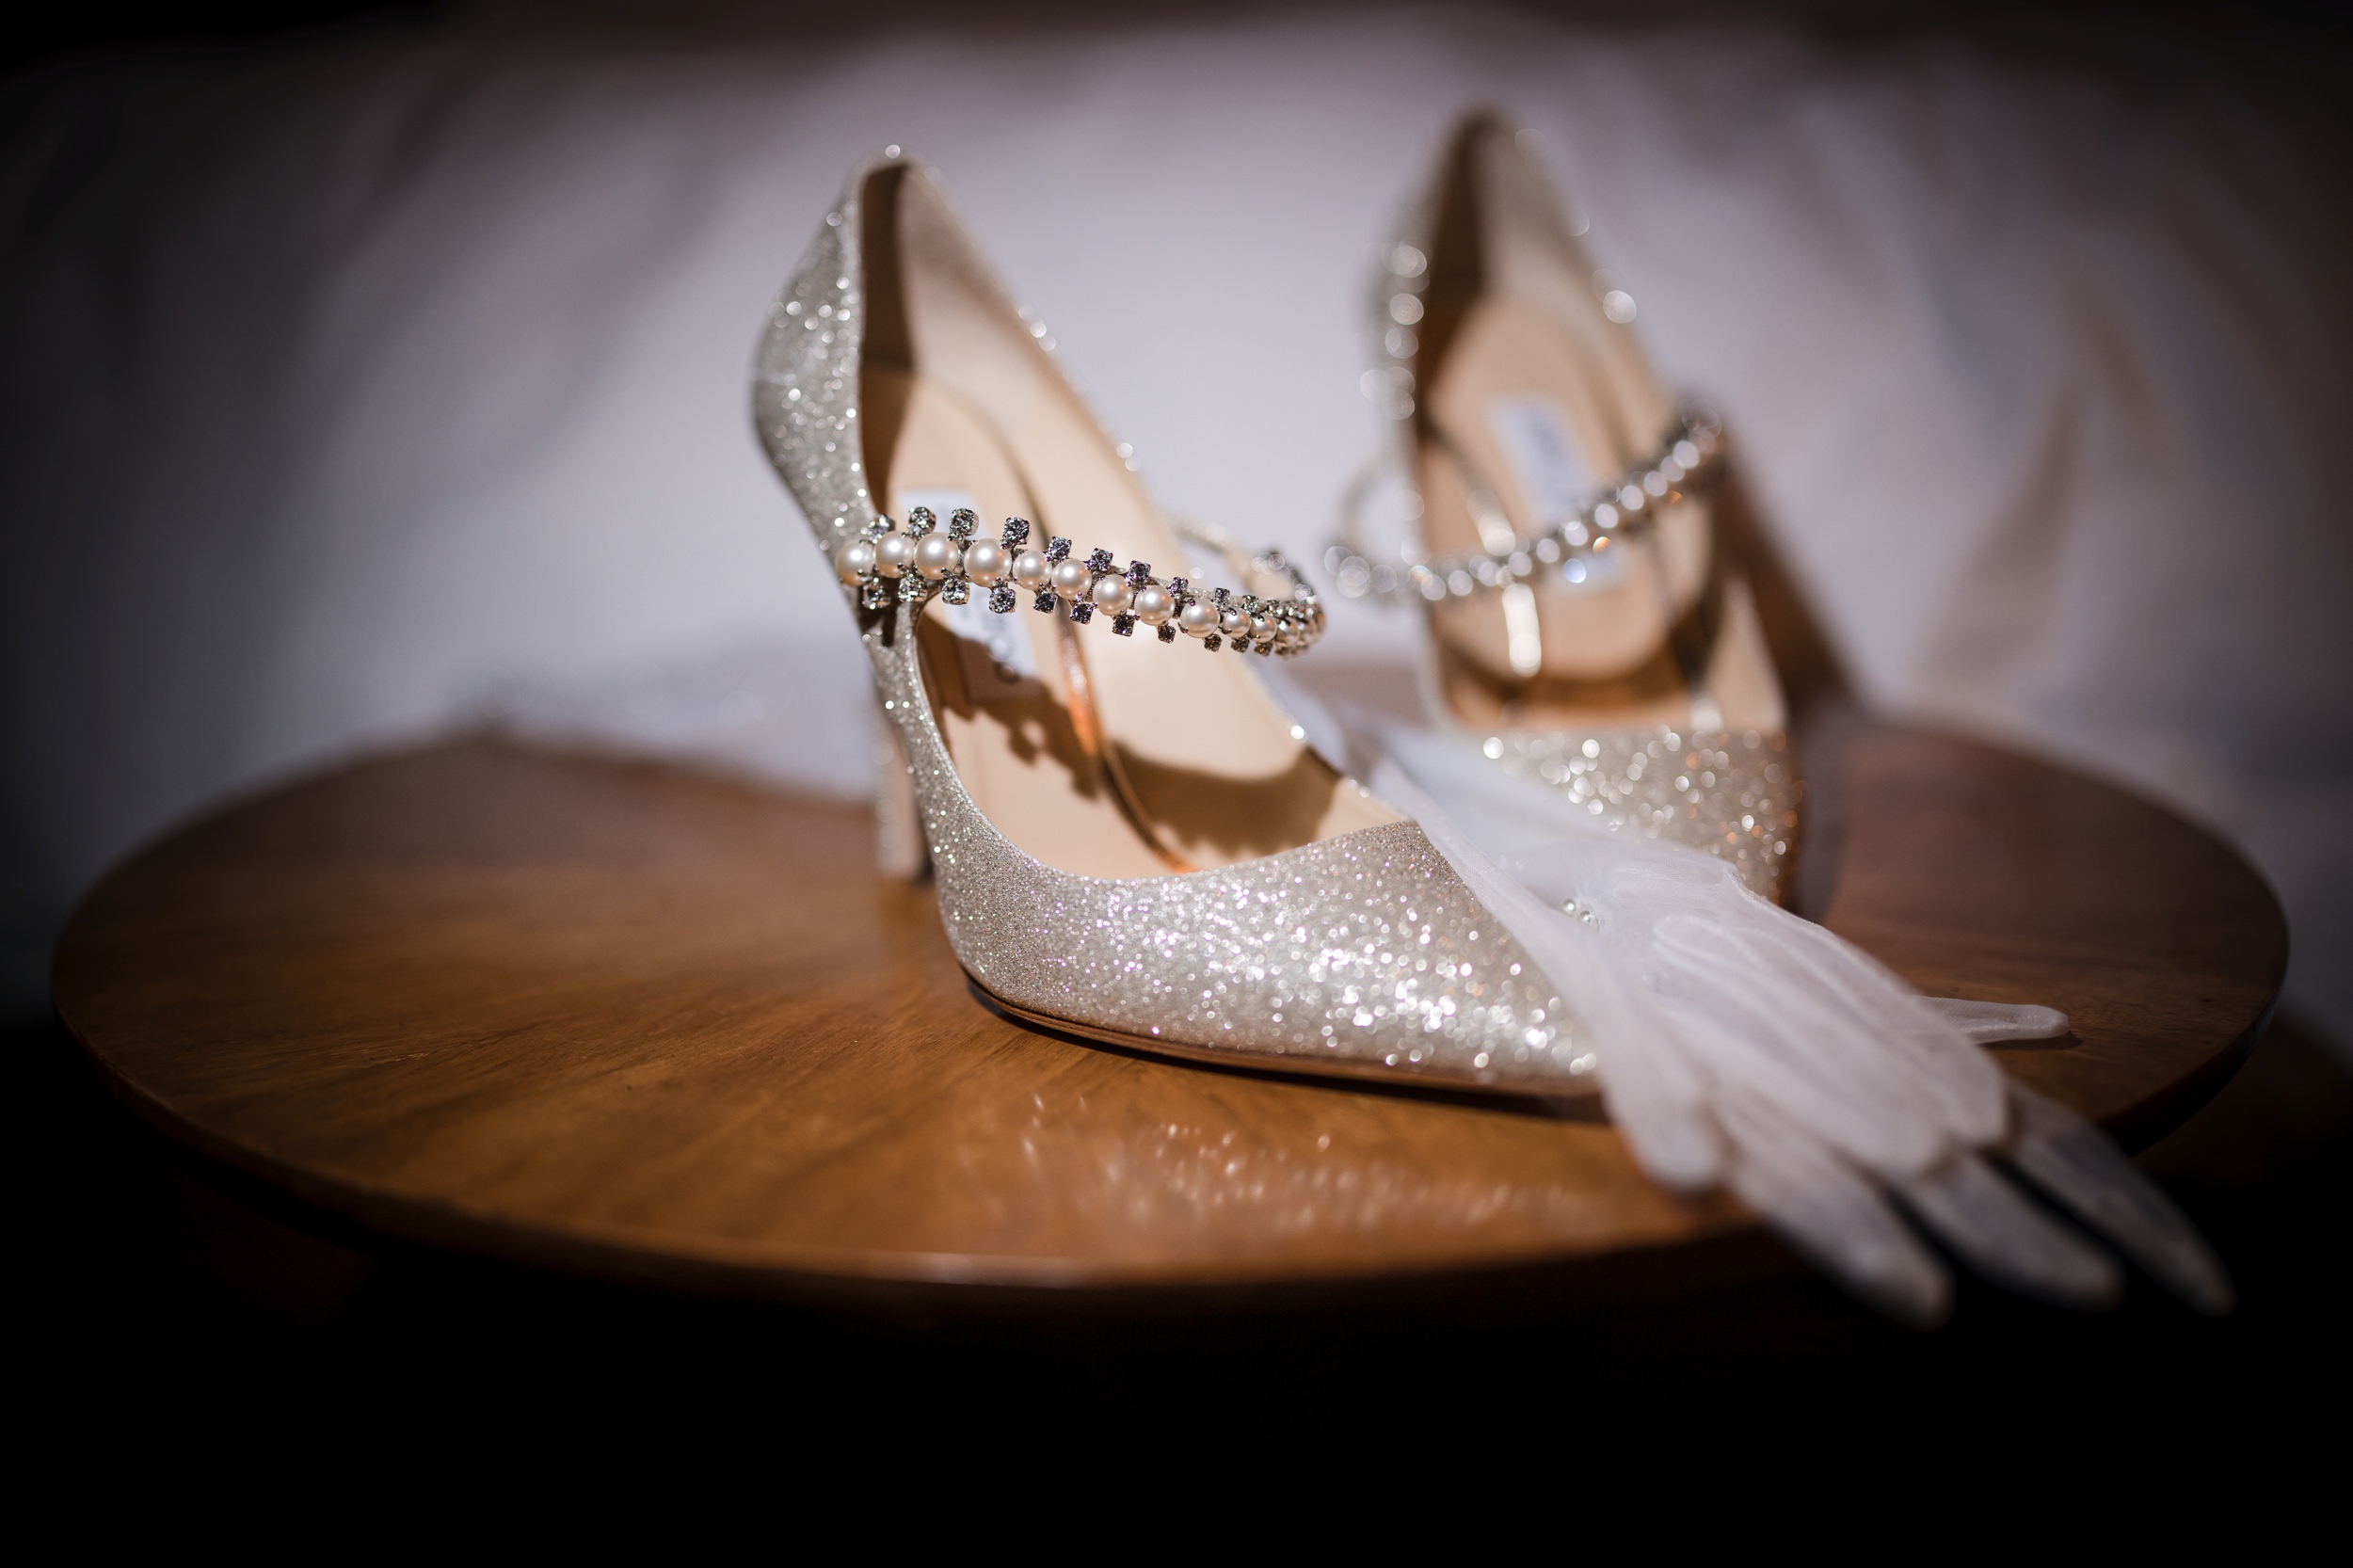 Jimmy Choo shoes at a Beekman Hotel wedding in NYC